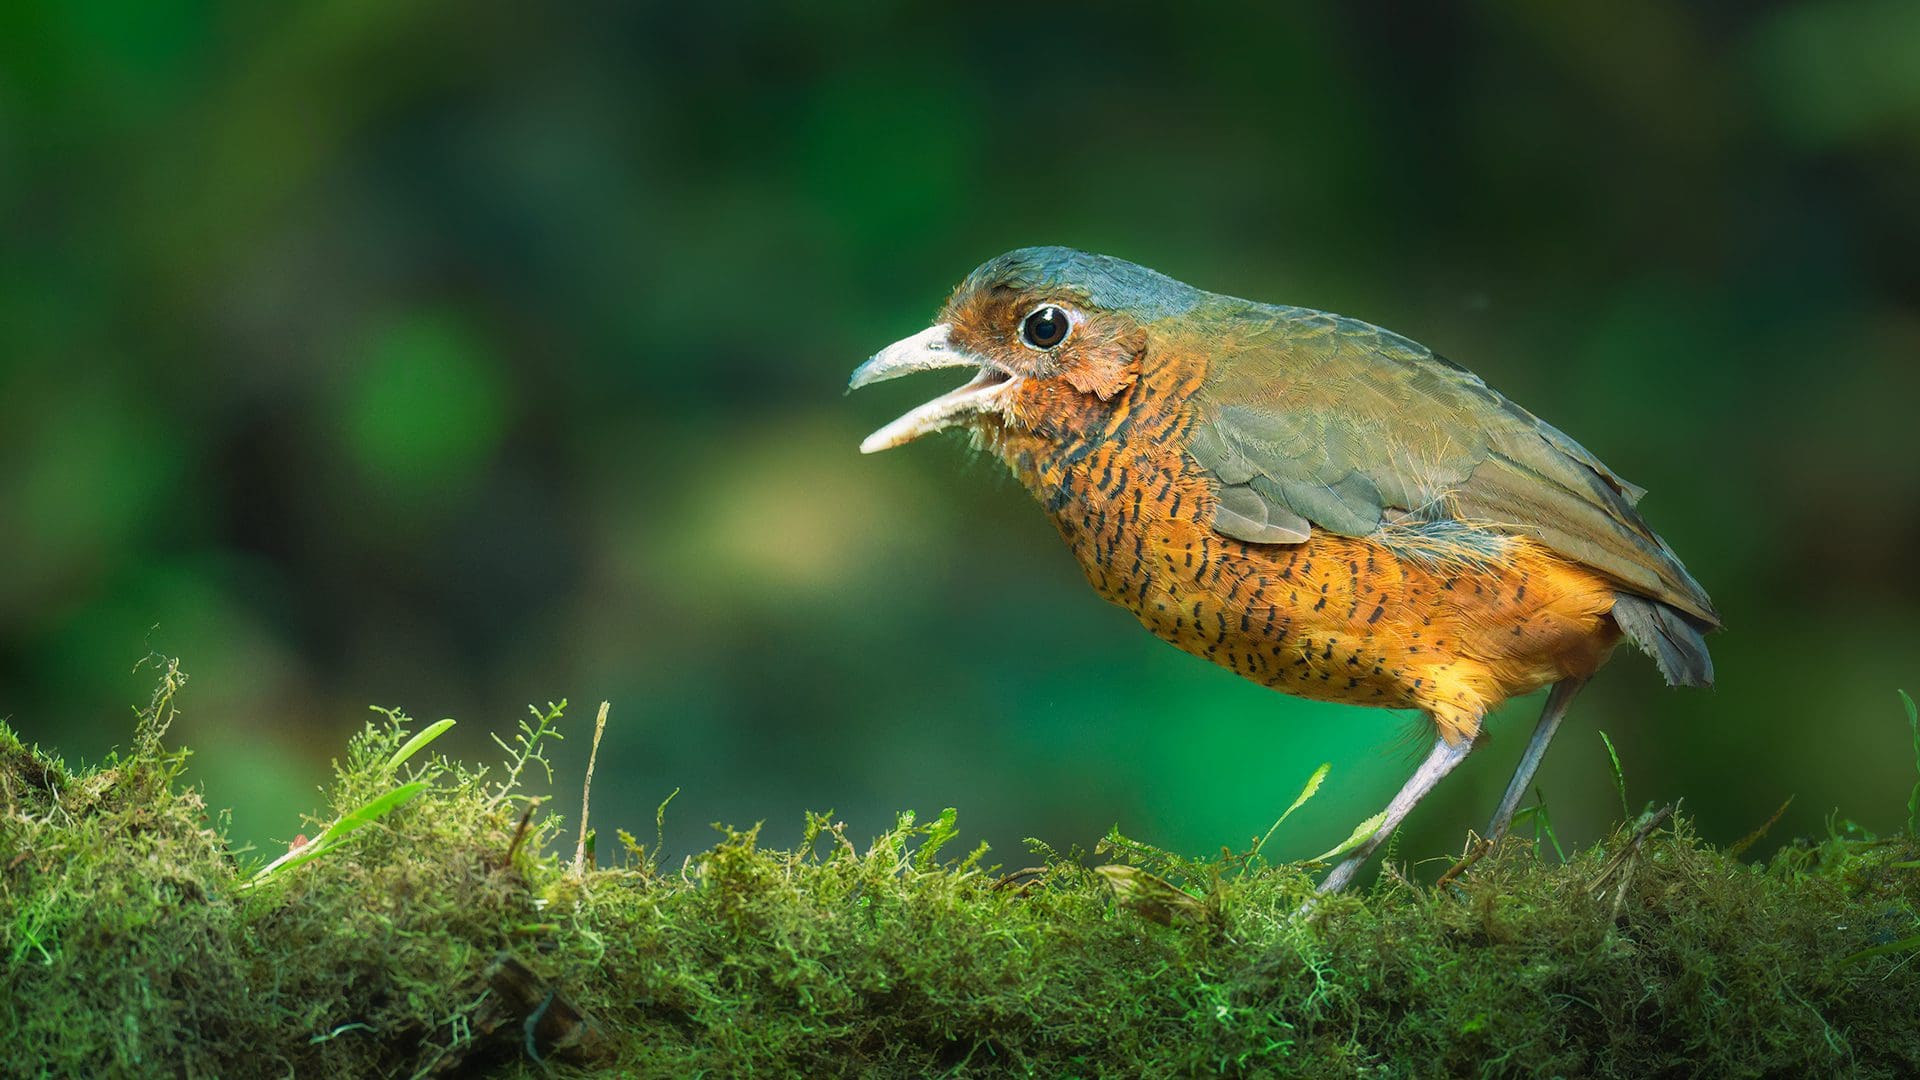 A Giant Antpitta - a bird with a rusty red breast flecked with black stripes, a dull brown back, a deep brown eye and white eye ring, and large gray beak, with long legs stands on a mossy branch